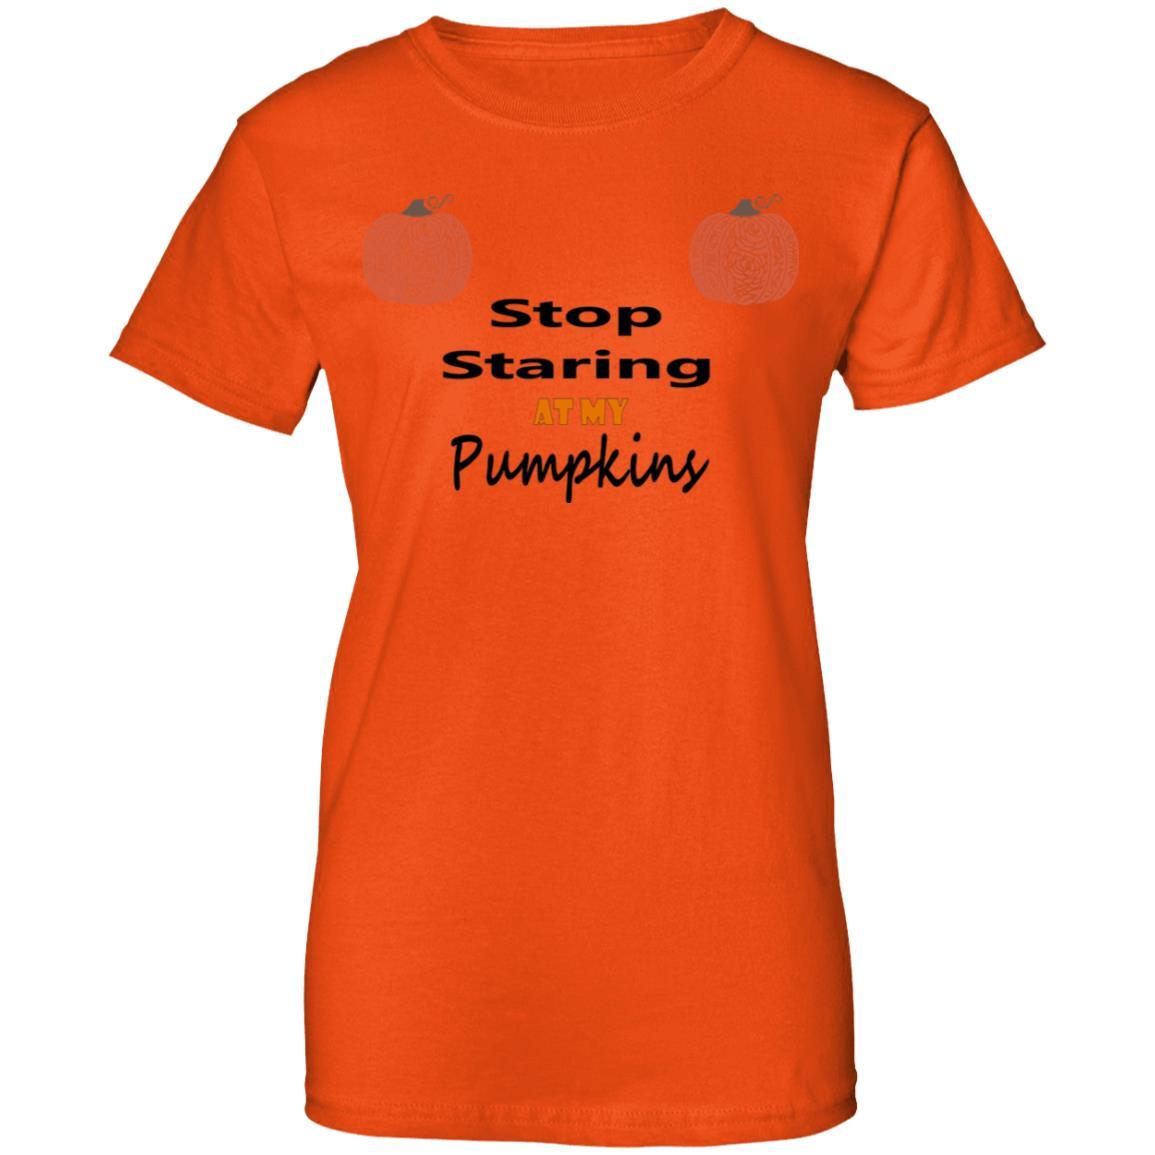 T-Shirts Orange / X-Small WineyBitches.Co "Stop Staring At My Pumpkins" Ladies' 100% Cotton T-Shirt WineyBitchesCo